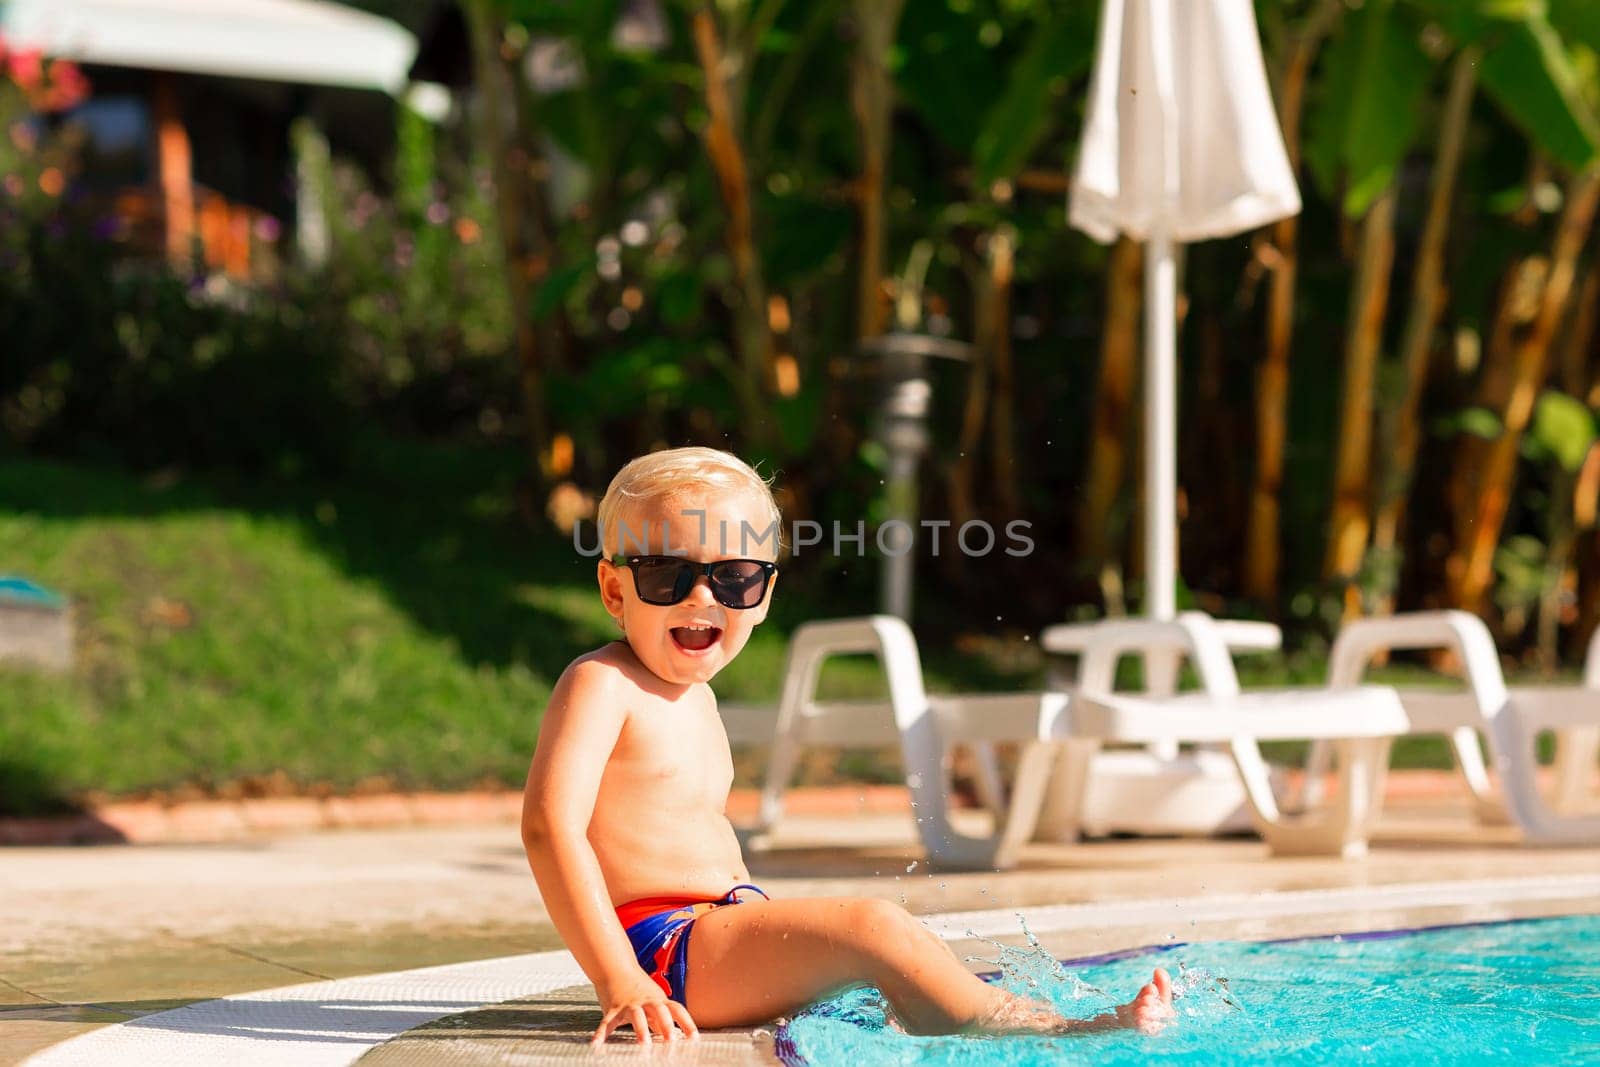 Happy little boy having fun at the pool at the resort. Summer holiday for kids concept